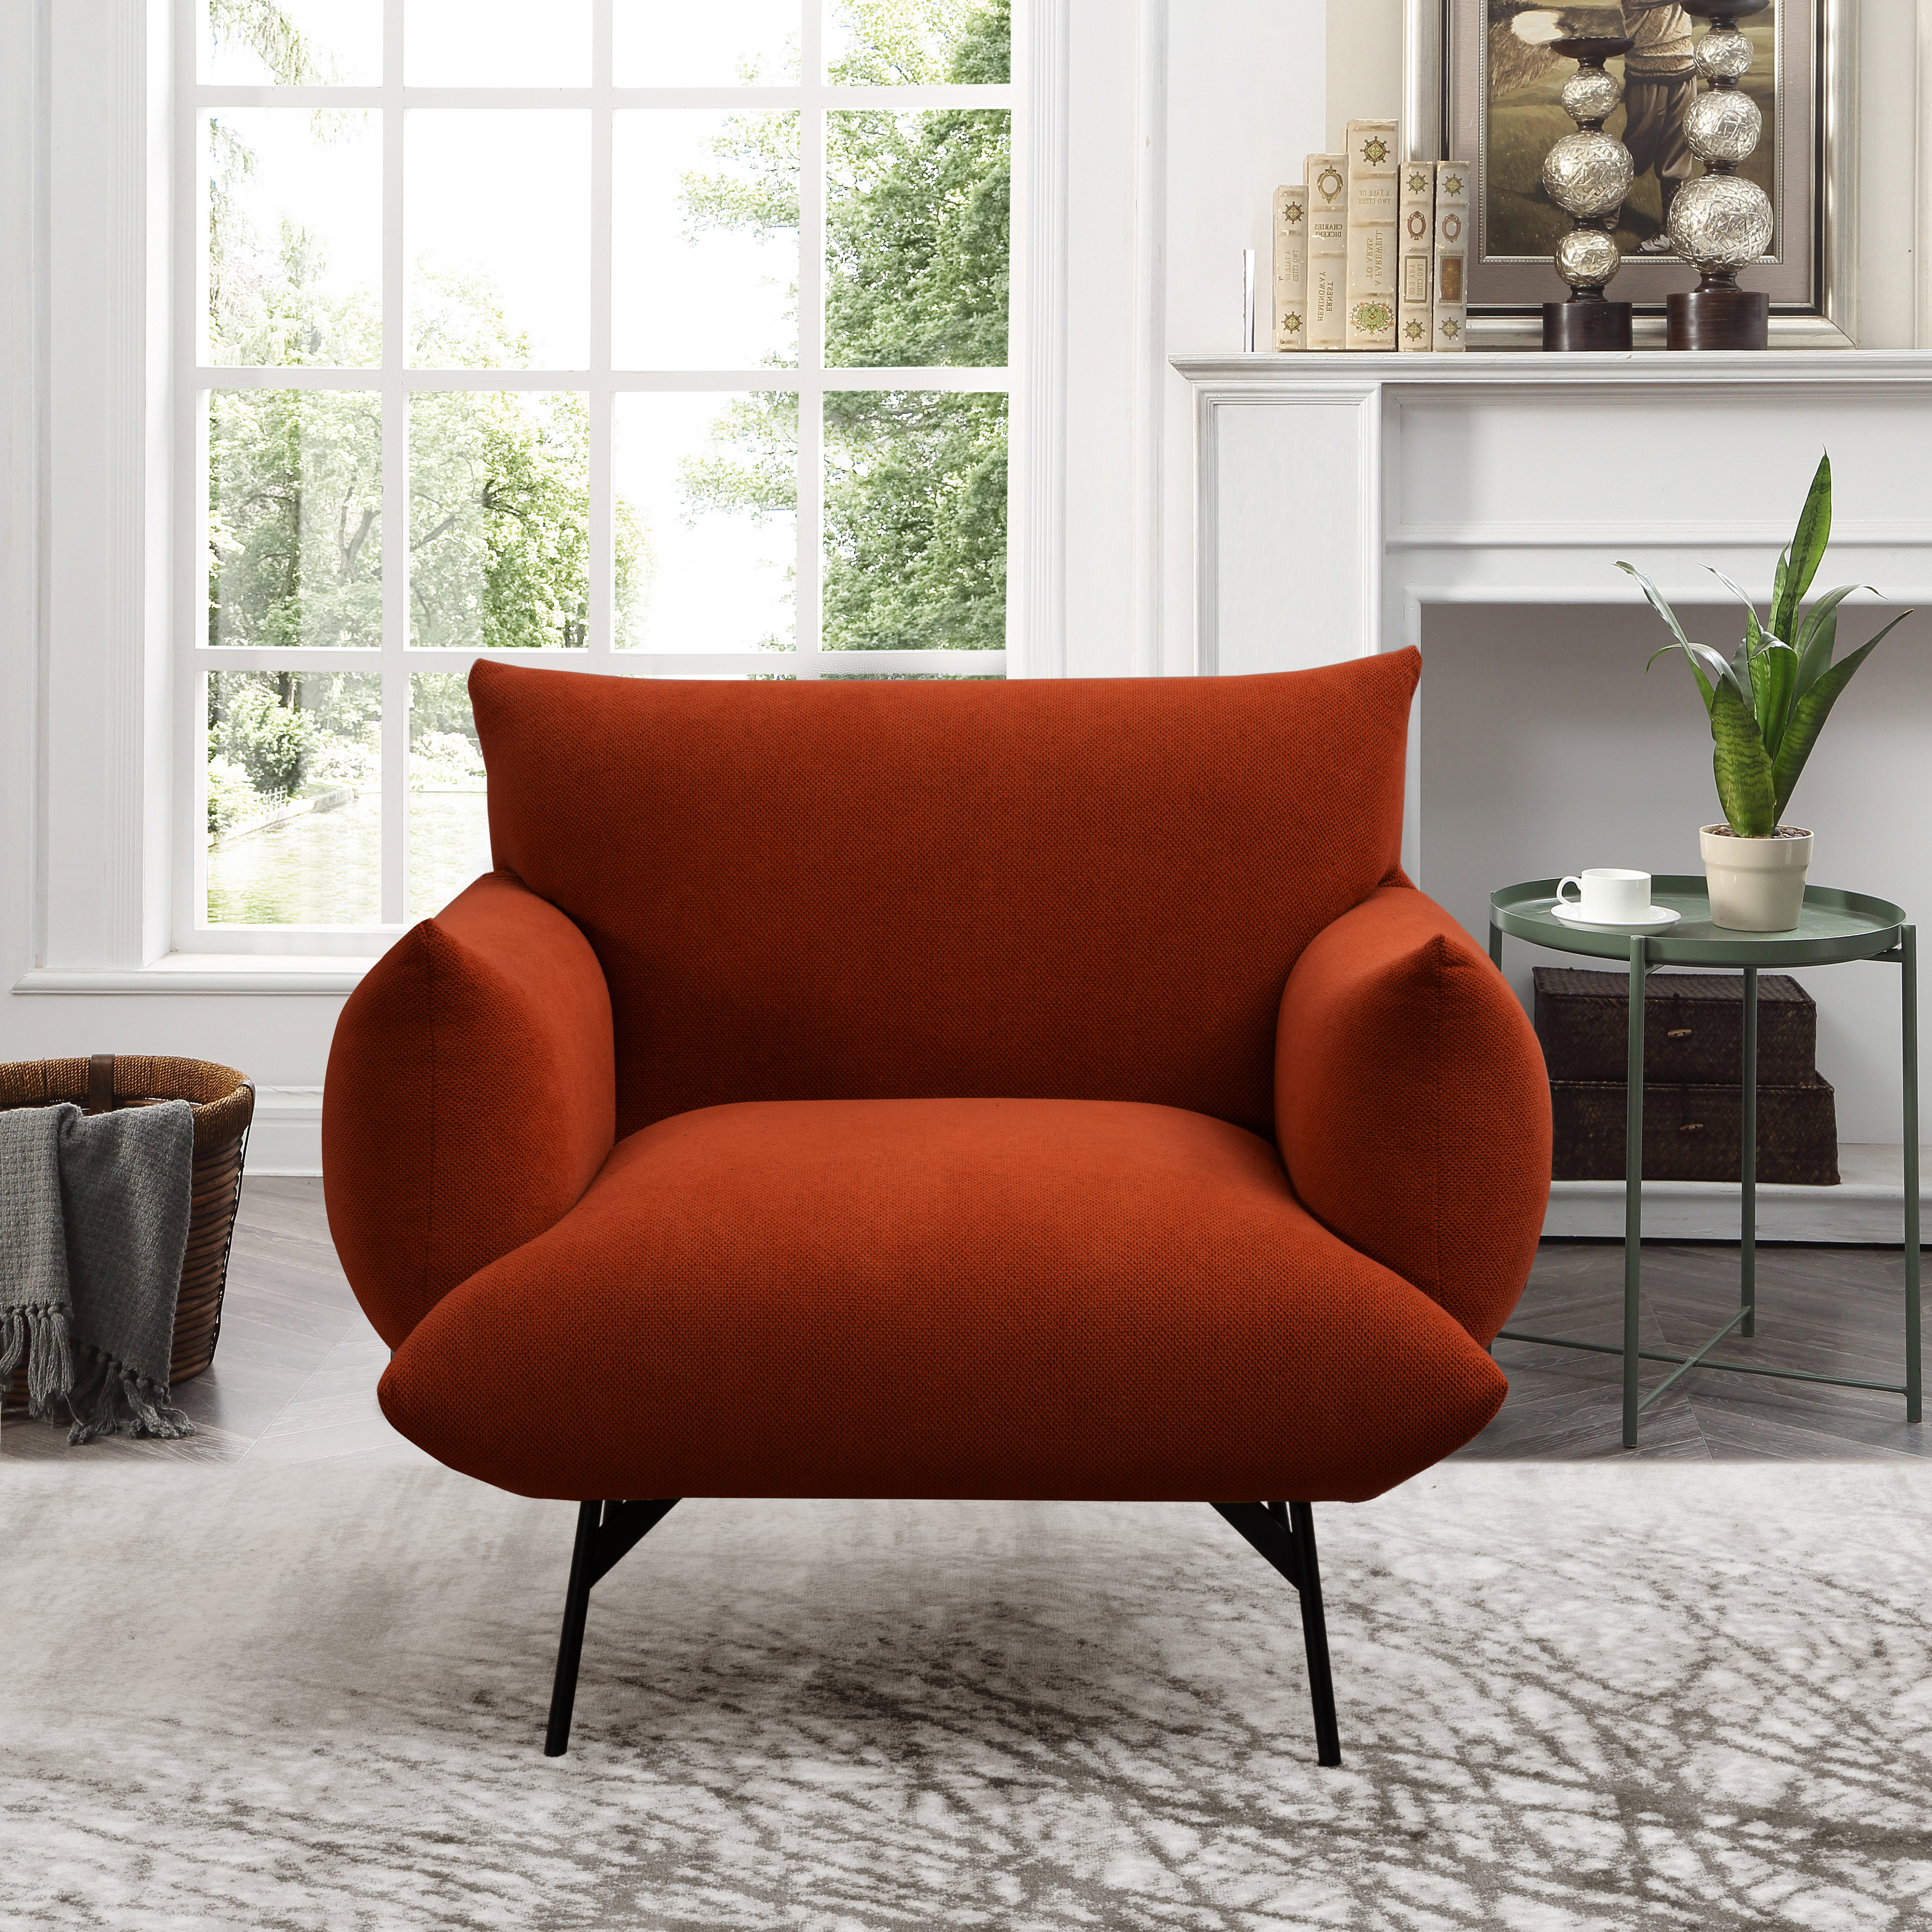 Orren Ellis Safwa Upholstered Accent Chair with Thickened Soft Pad, Modern  upholstered armchair with Stable Metal Legs | Wayfair